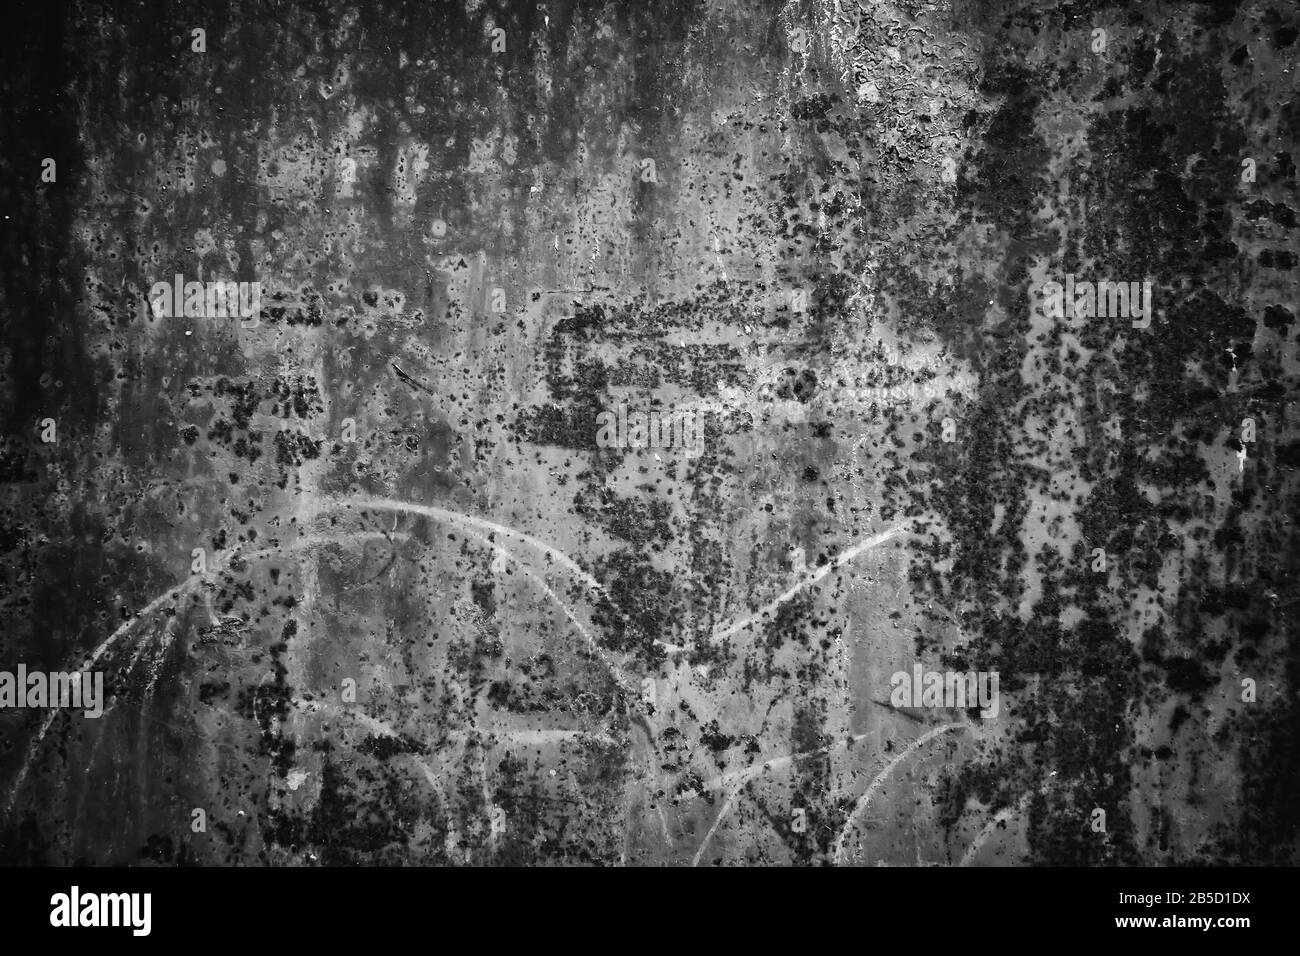 Spoiled and dirty metallic background, detail of a steel door down and dirty, exploration and texture Stock Photo